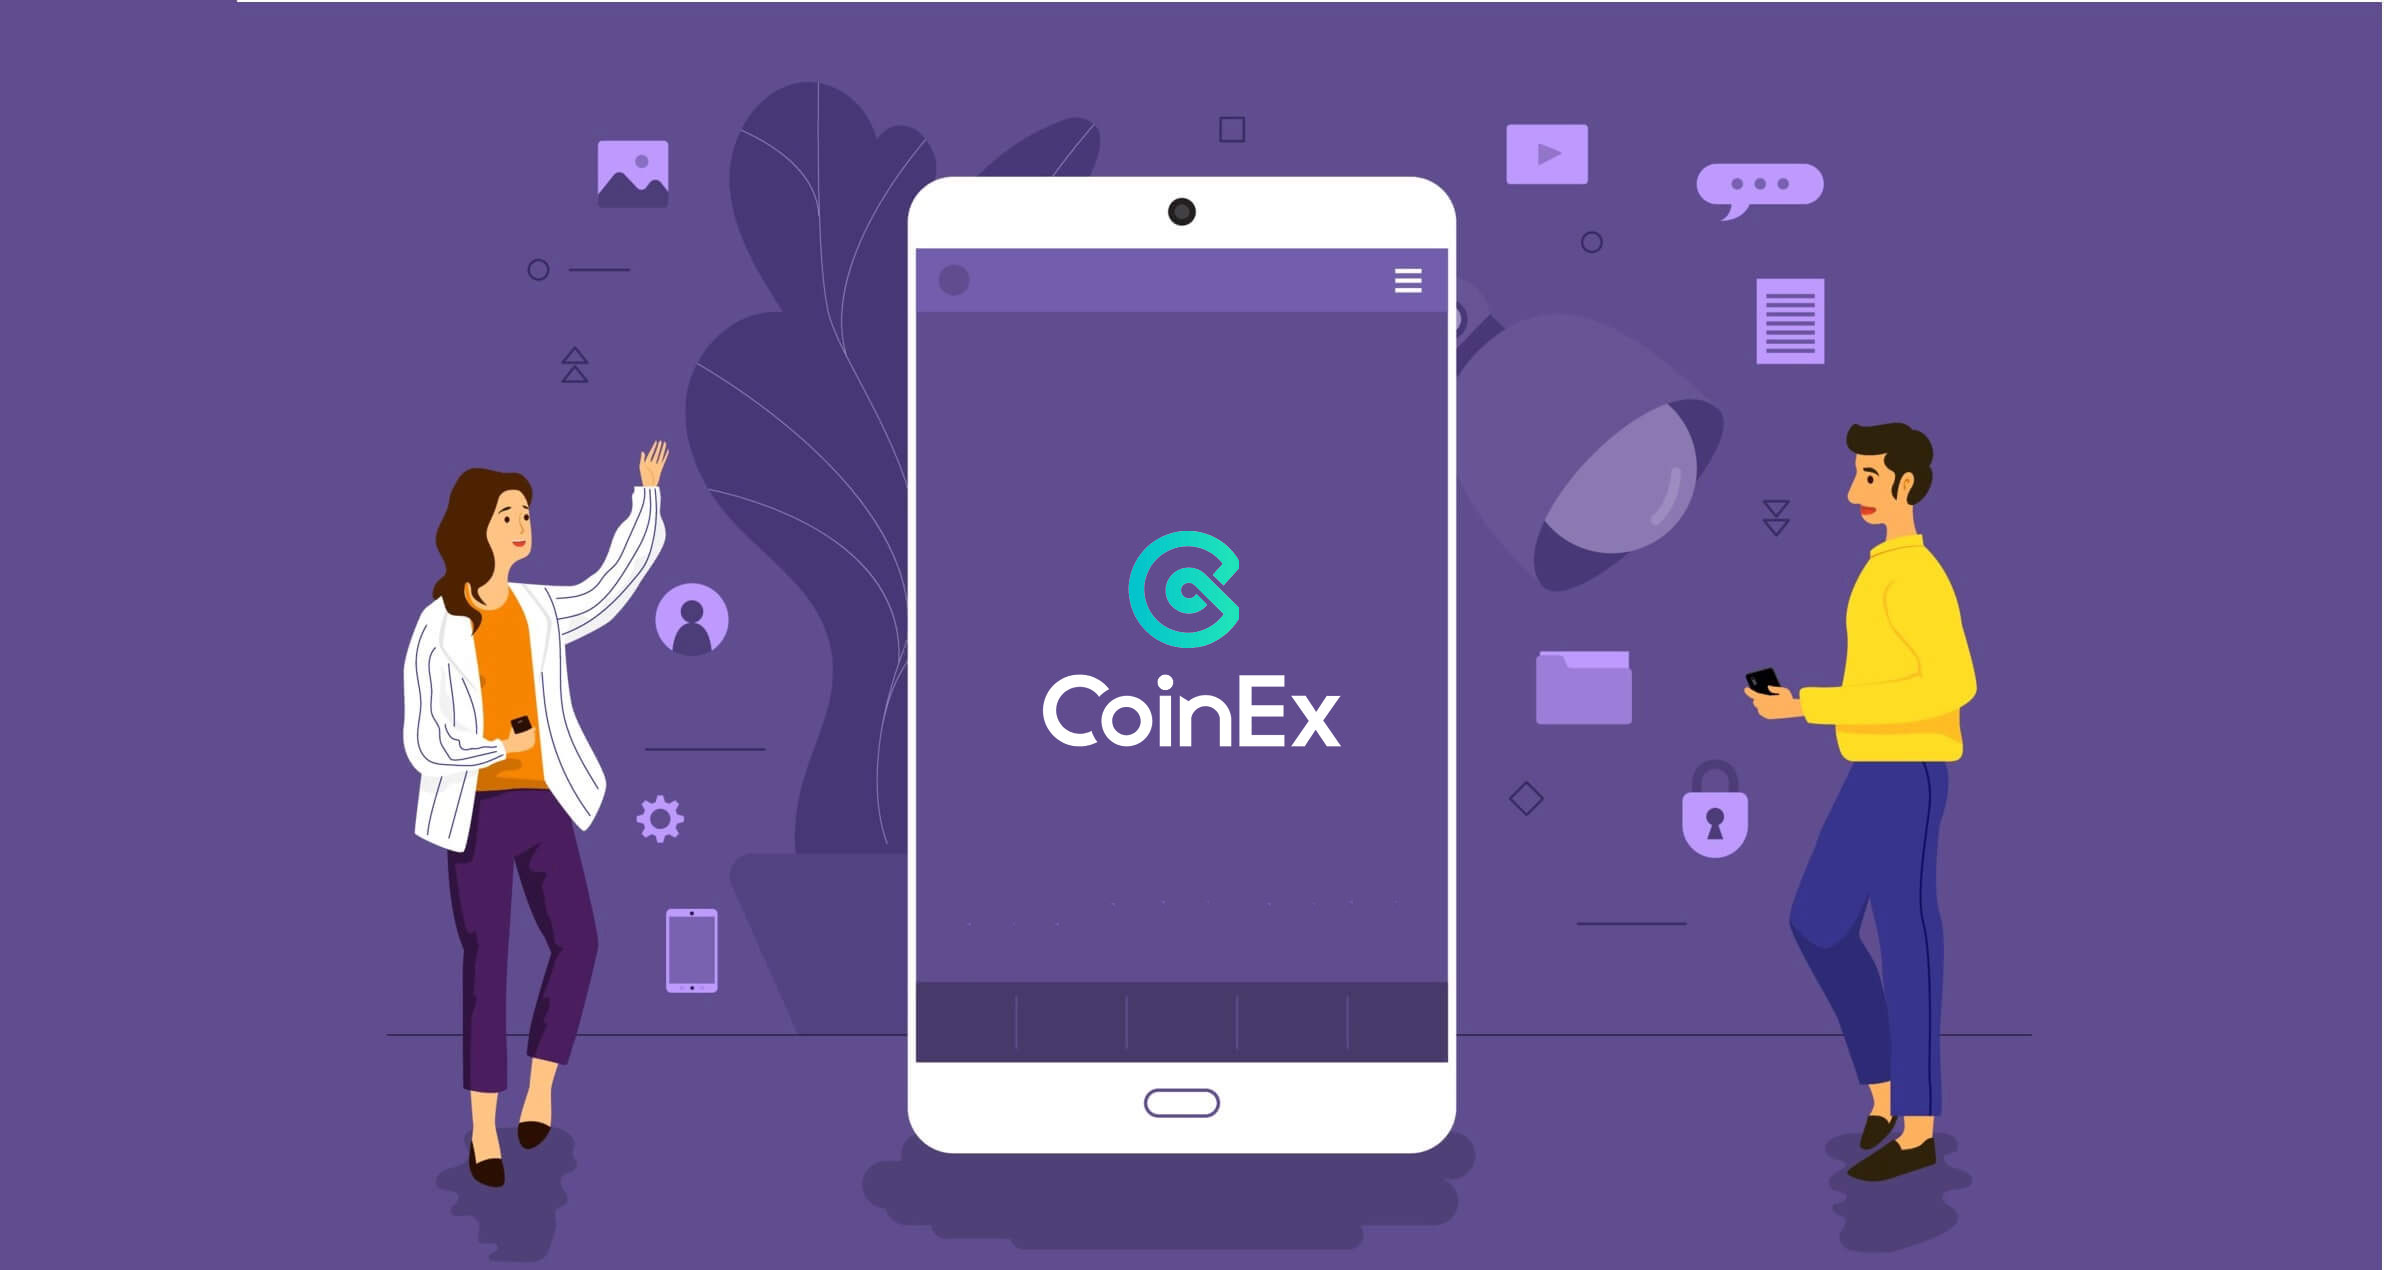 How to Download and Install CoinEx Application for Mobile (Android, iOS)